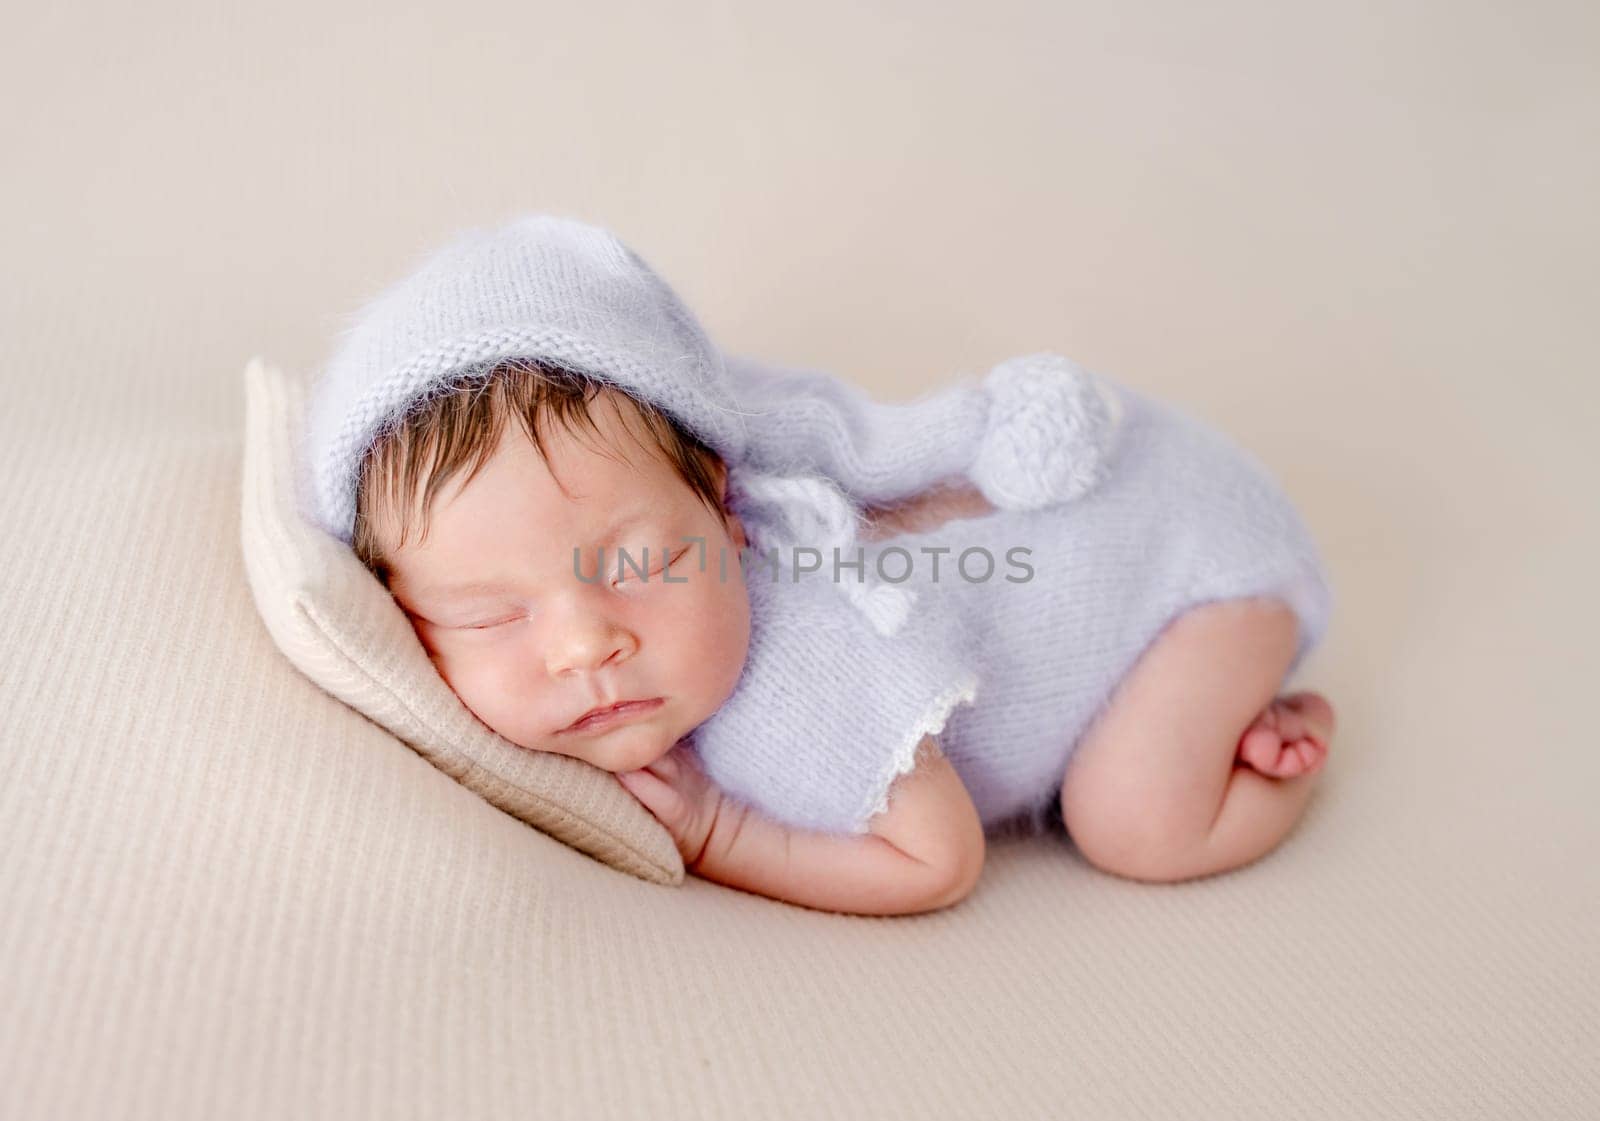 Adorable newborn baby girl sleeping on pillow. Cute infant child kid in knitted dress napping lying on tummy